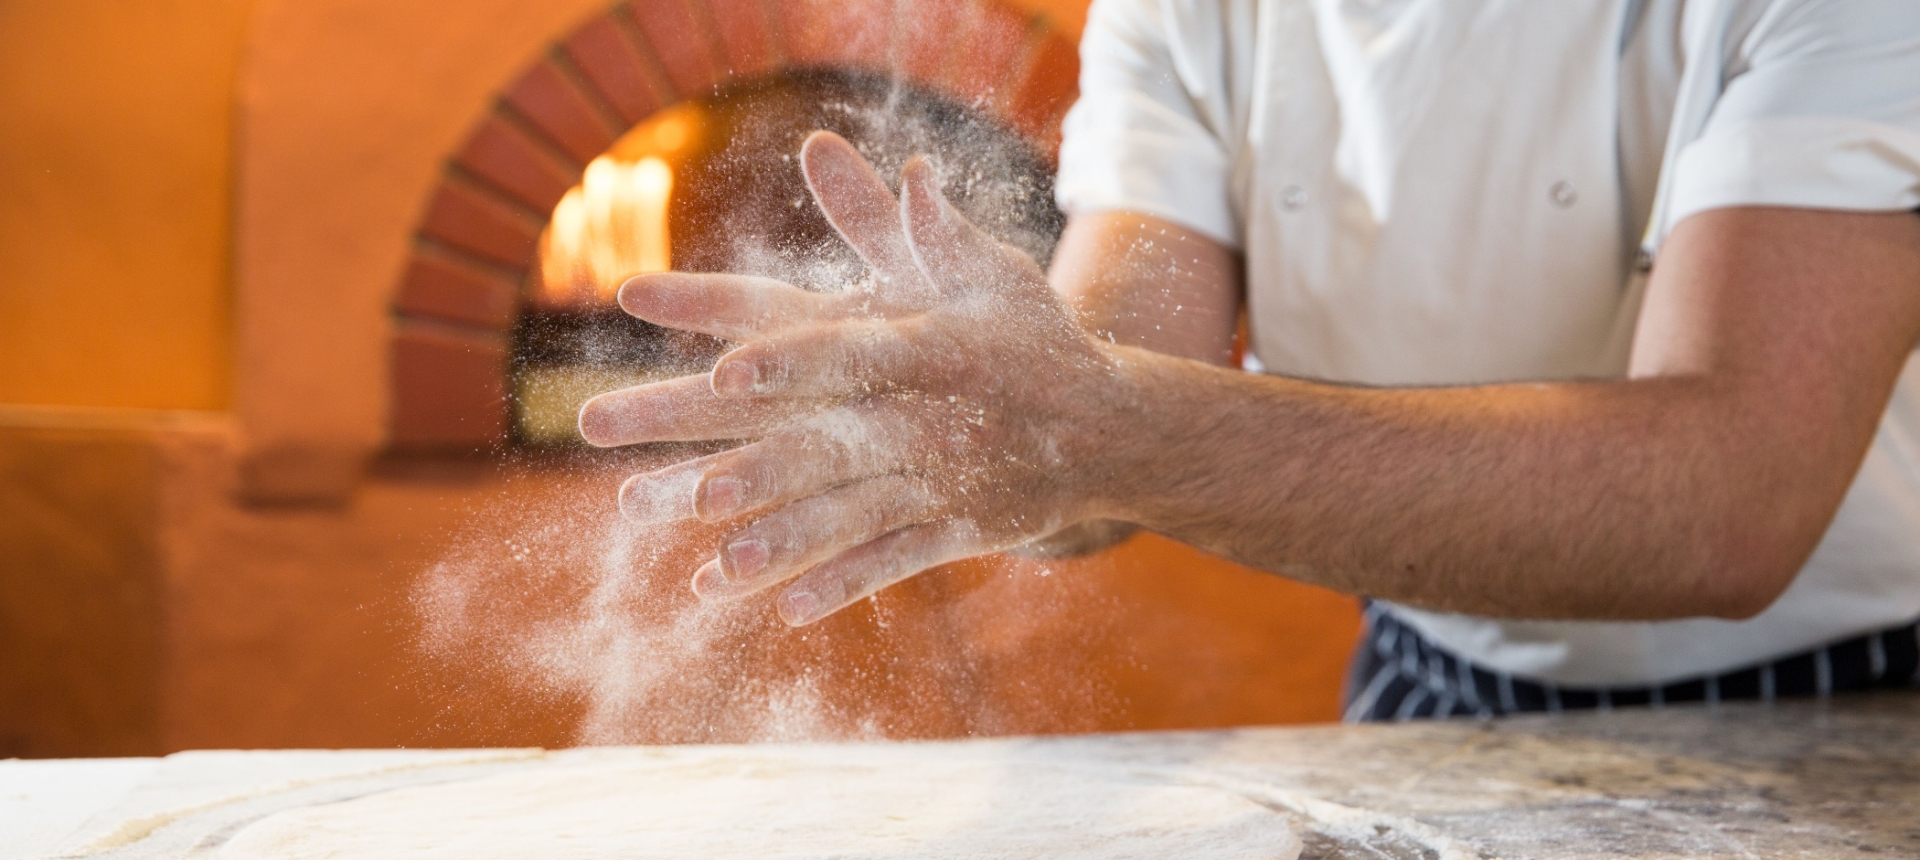 A chef claps his hand spreading flour into the air